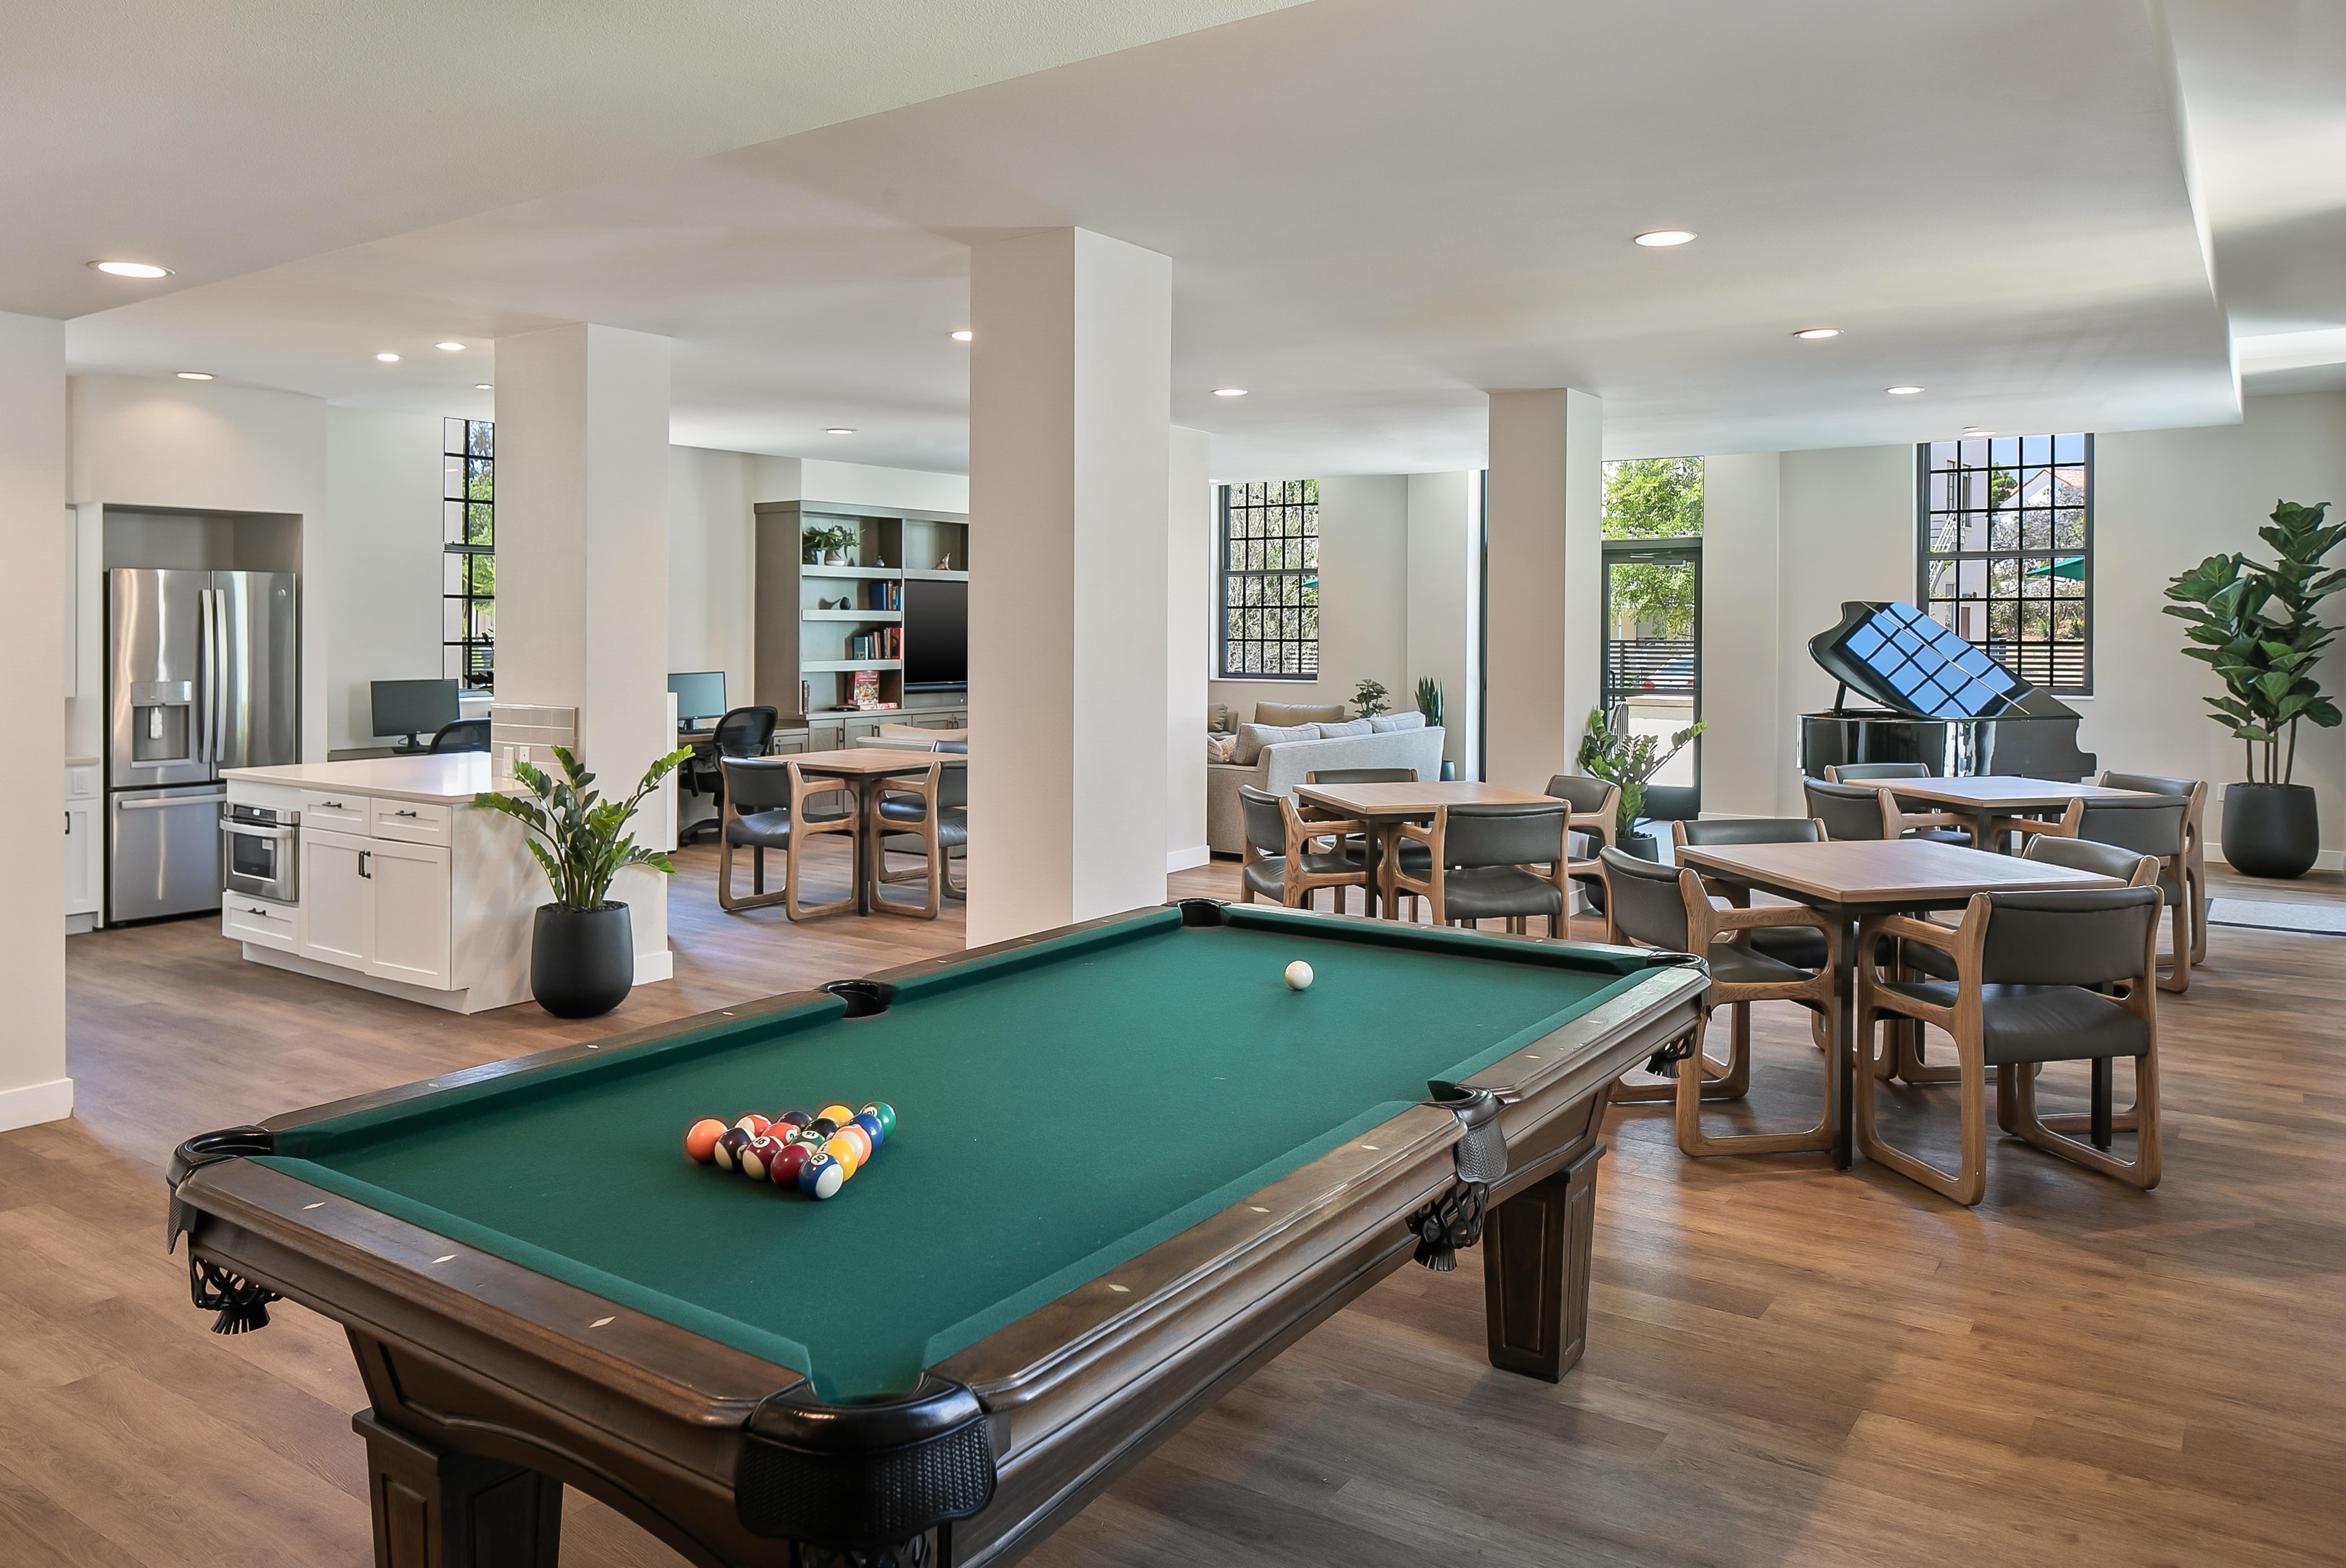 Large lounge with pool table, grand piano, and kitchenette